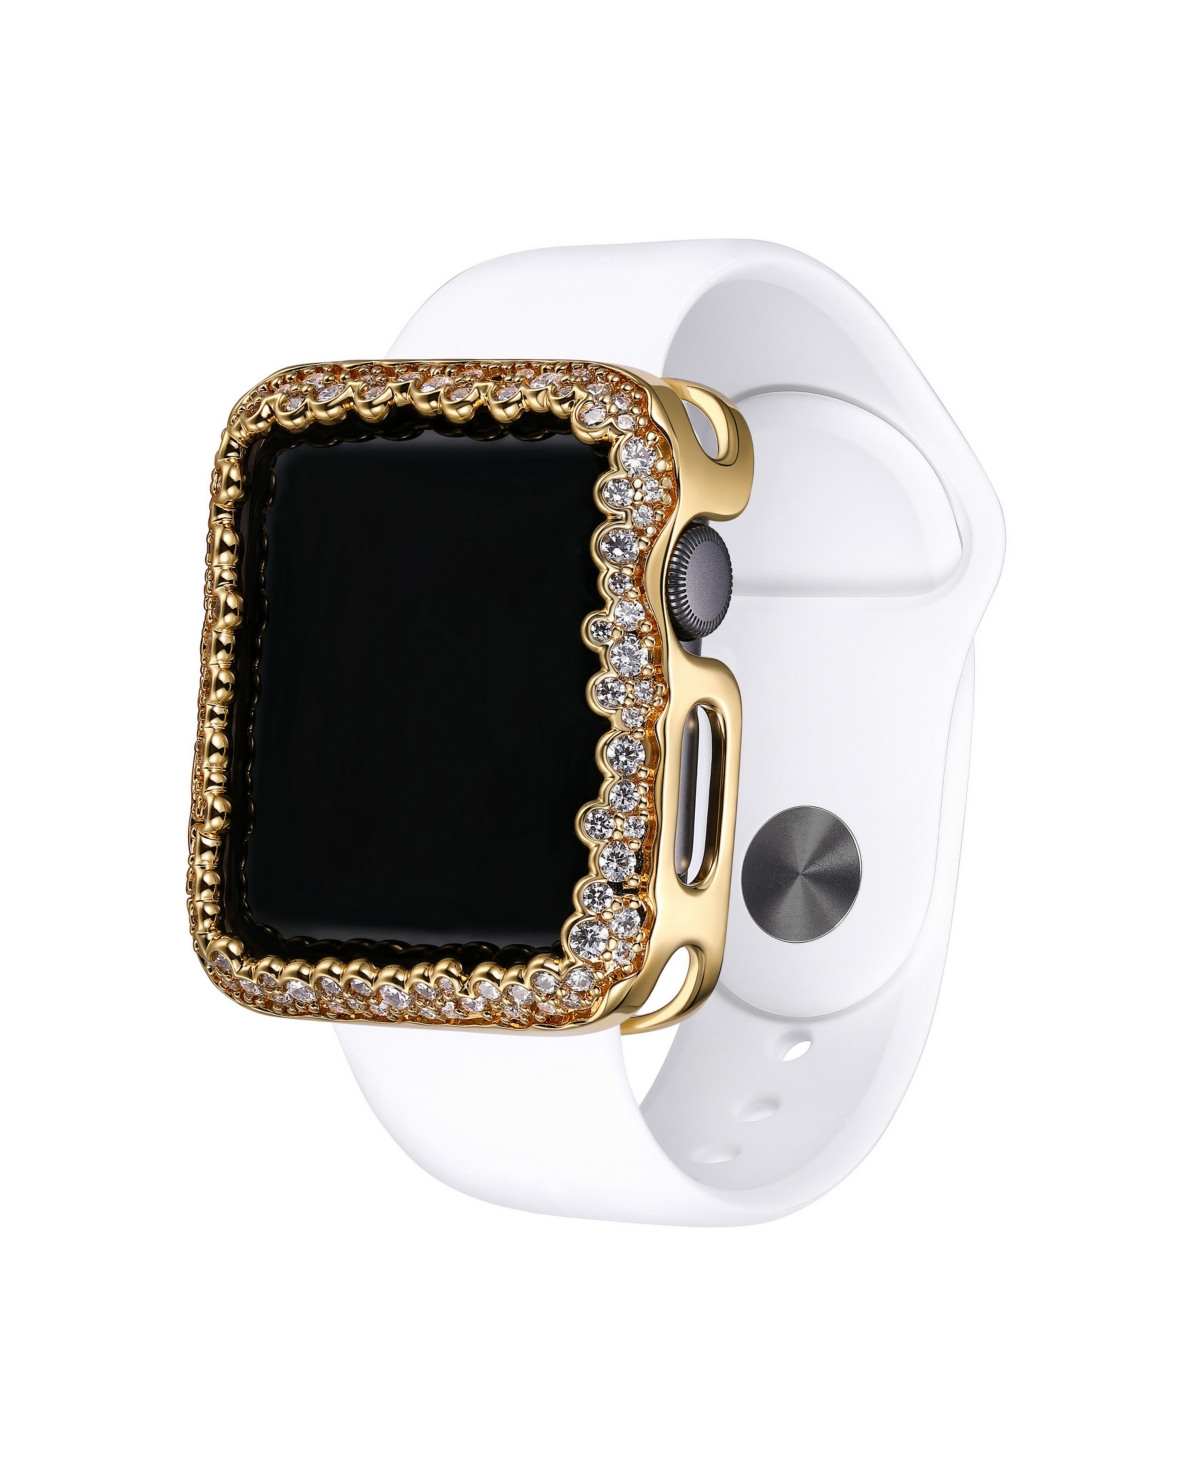 Champagne Bubbles Apple Watch Case, Series 1-3, 38mm - Gold-Tone